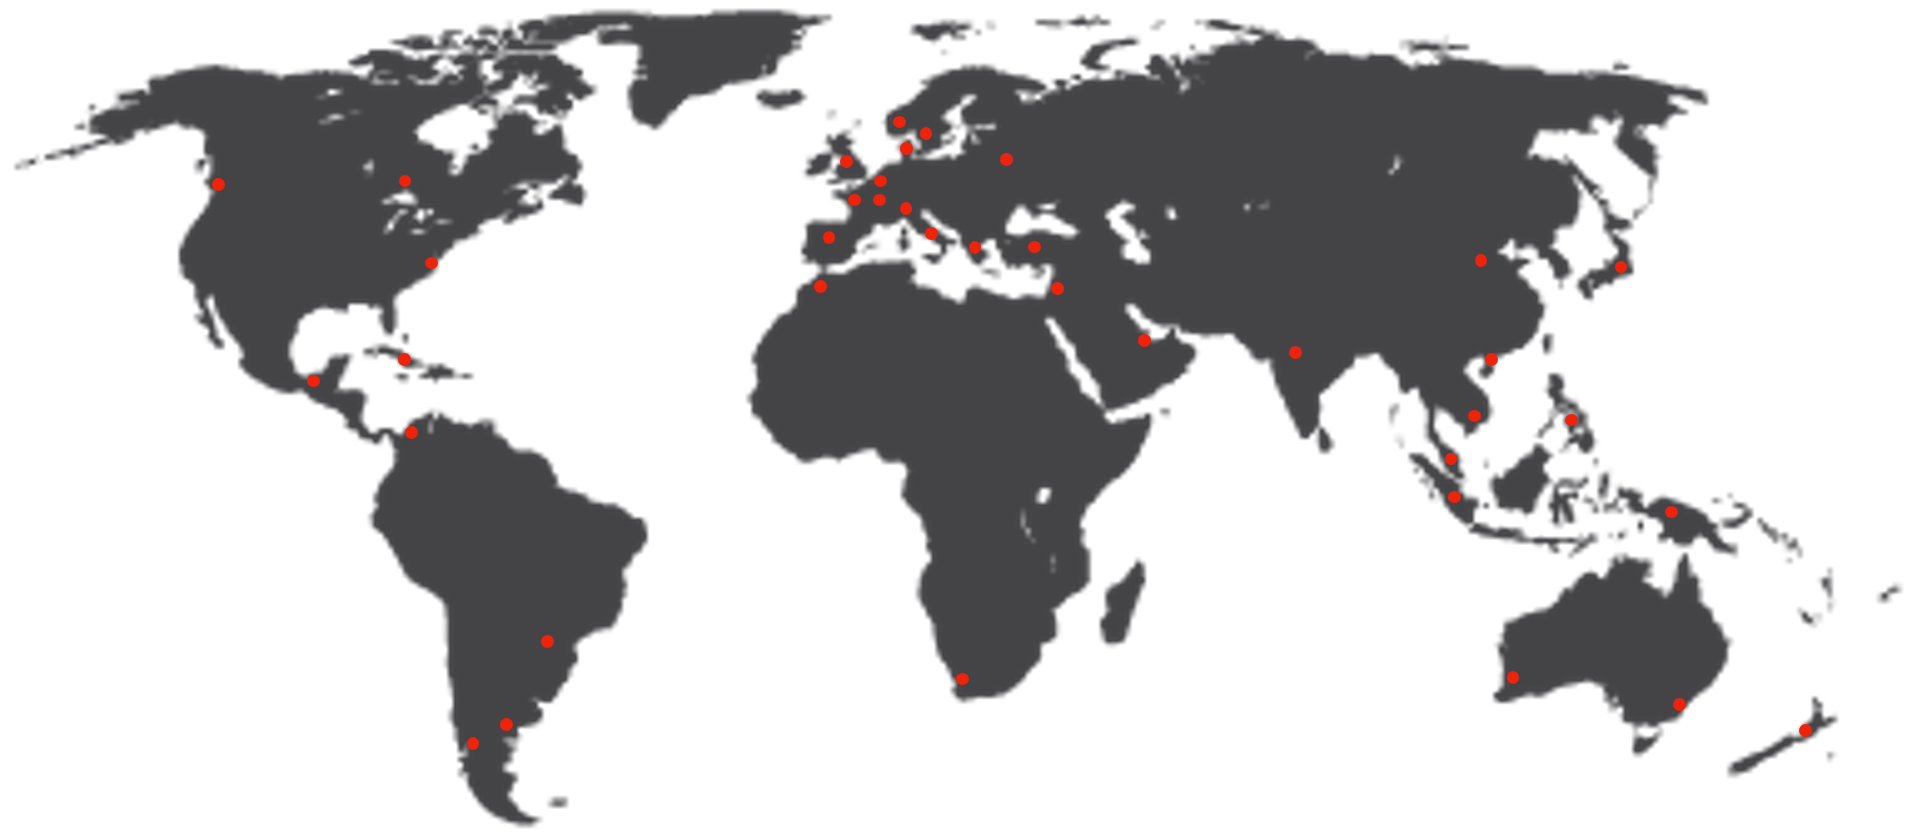 world-map-red-dots